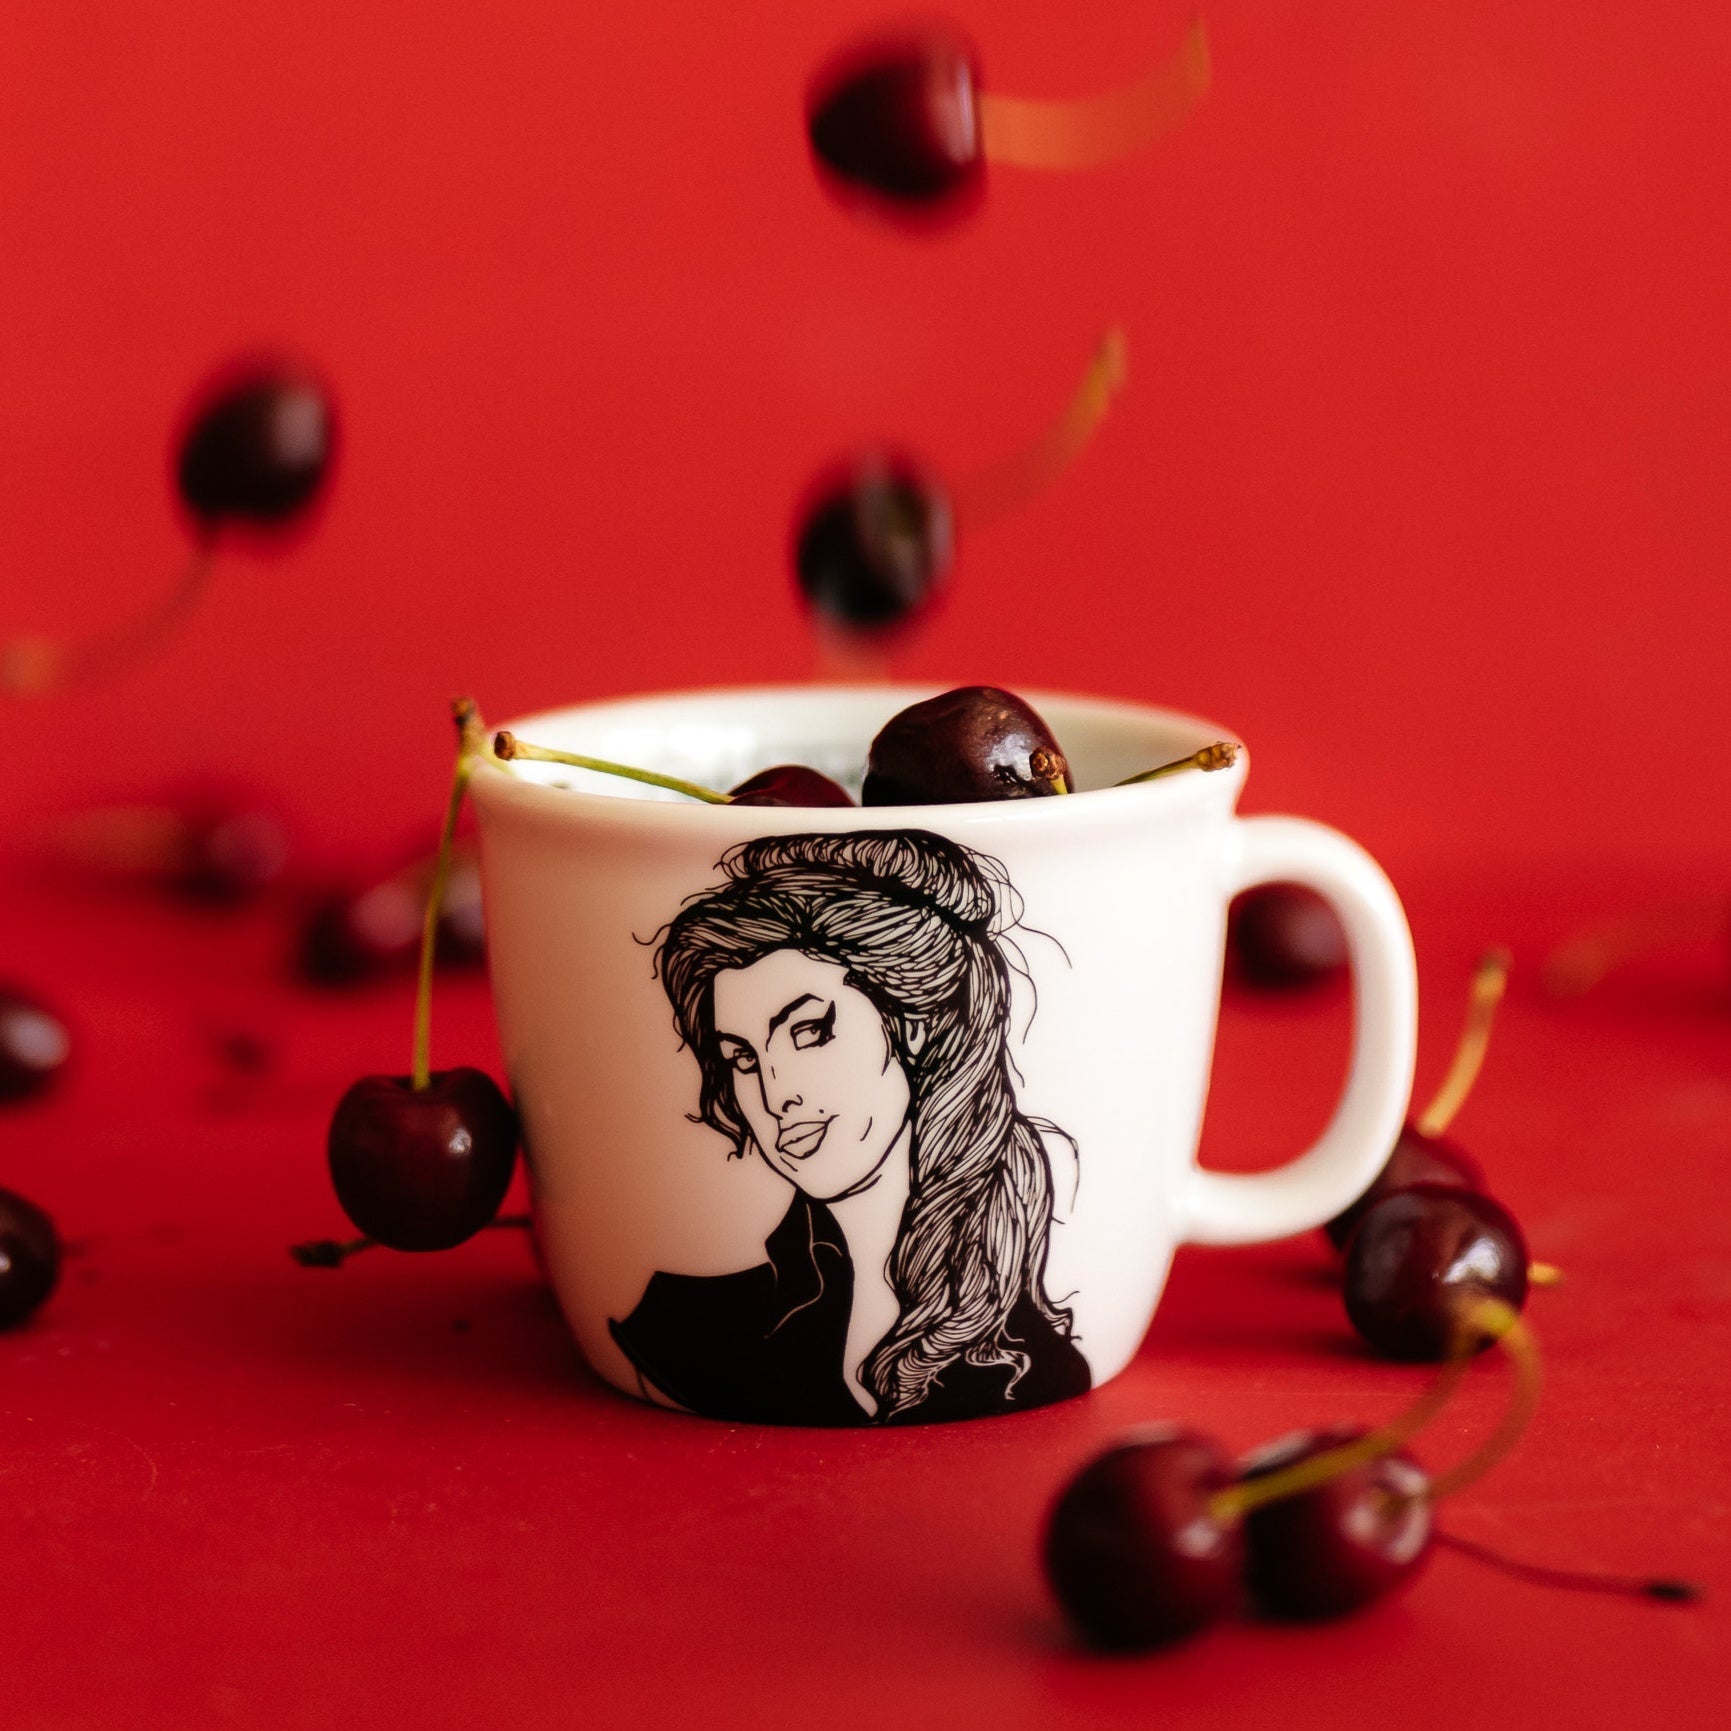 Porcelain cup inspired by Amy Winehouse with cherries